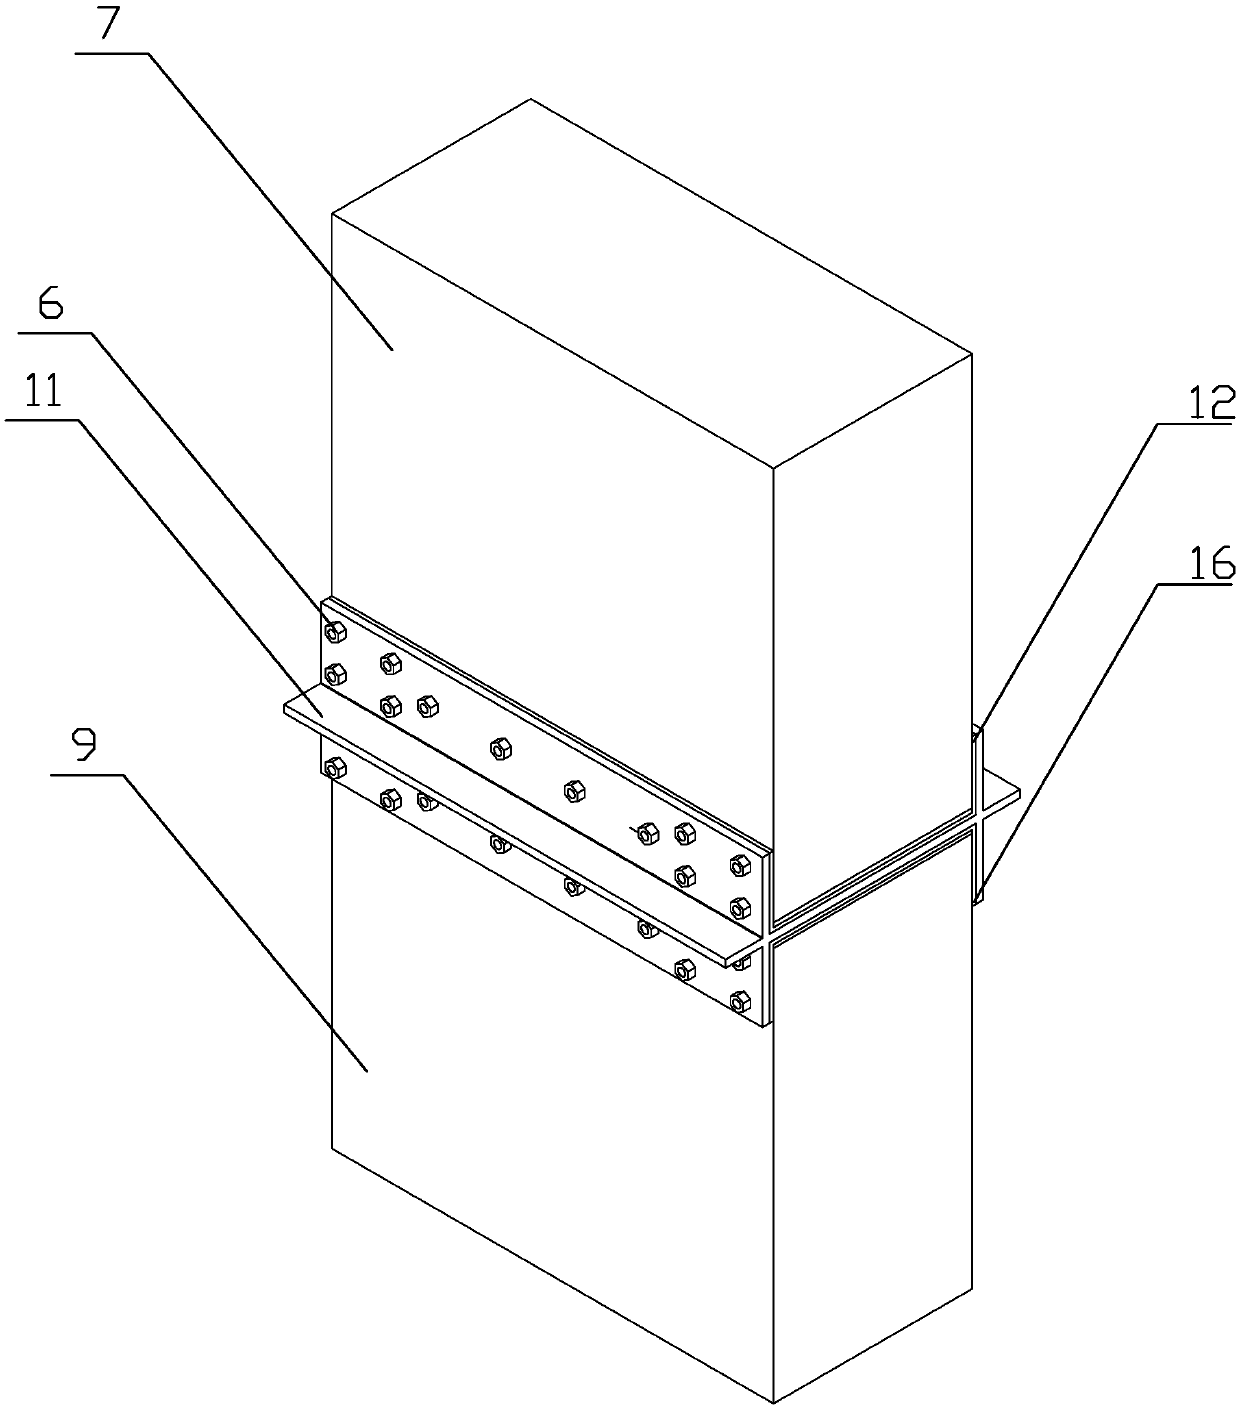 Fabricated shear wall horizontal connection structure and construction method